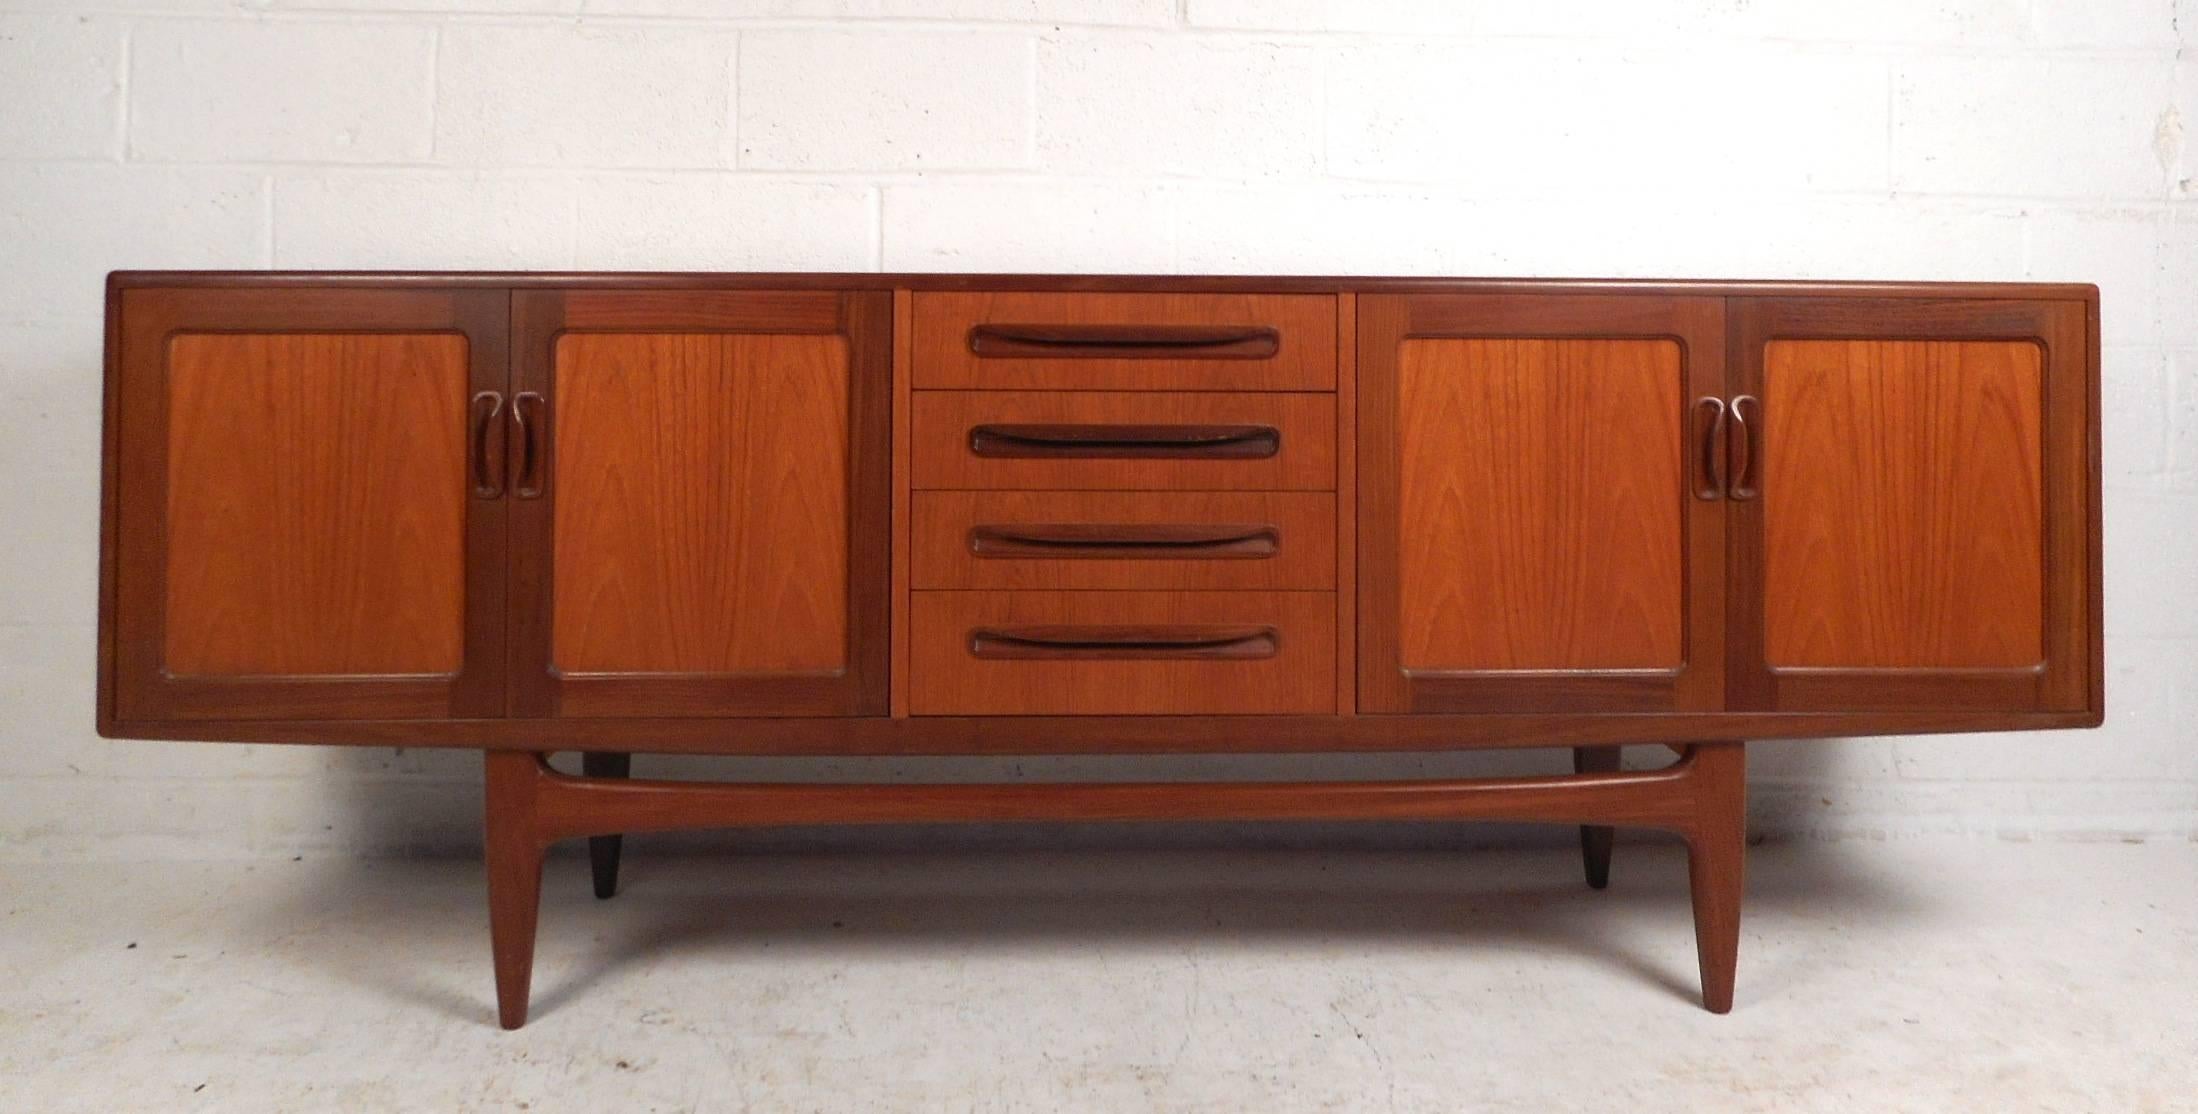 This beautiful vintage modern sideboard features plenty of room for storage within its four hefty drawers and two large storage compartments hidden by cabinet doors. Sleek two-tone design with unique carved pulls and tapered legs adding to the